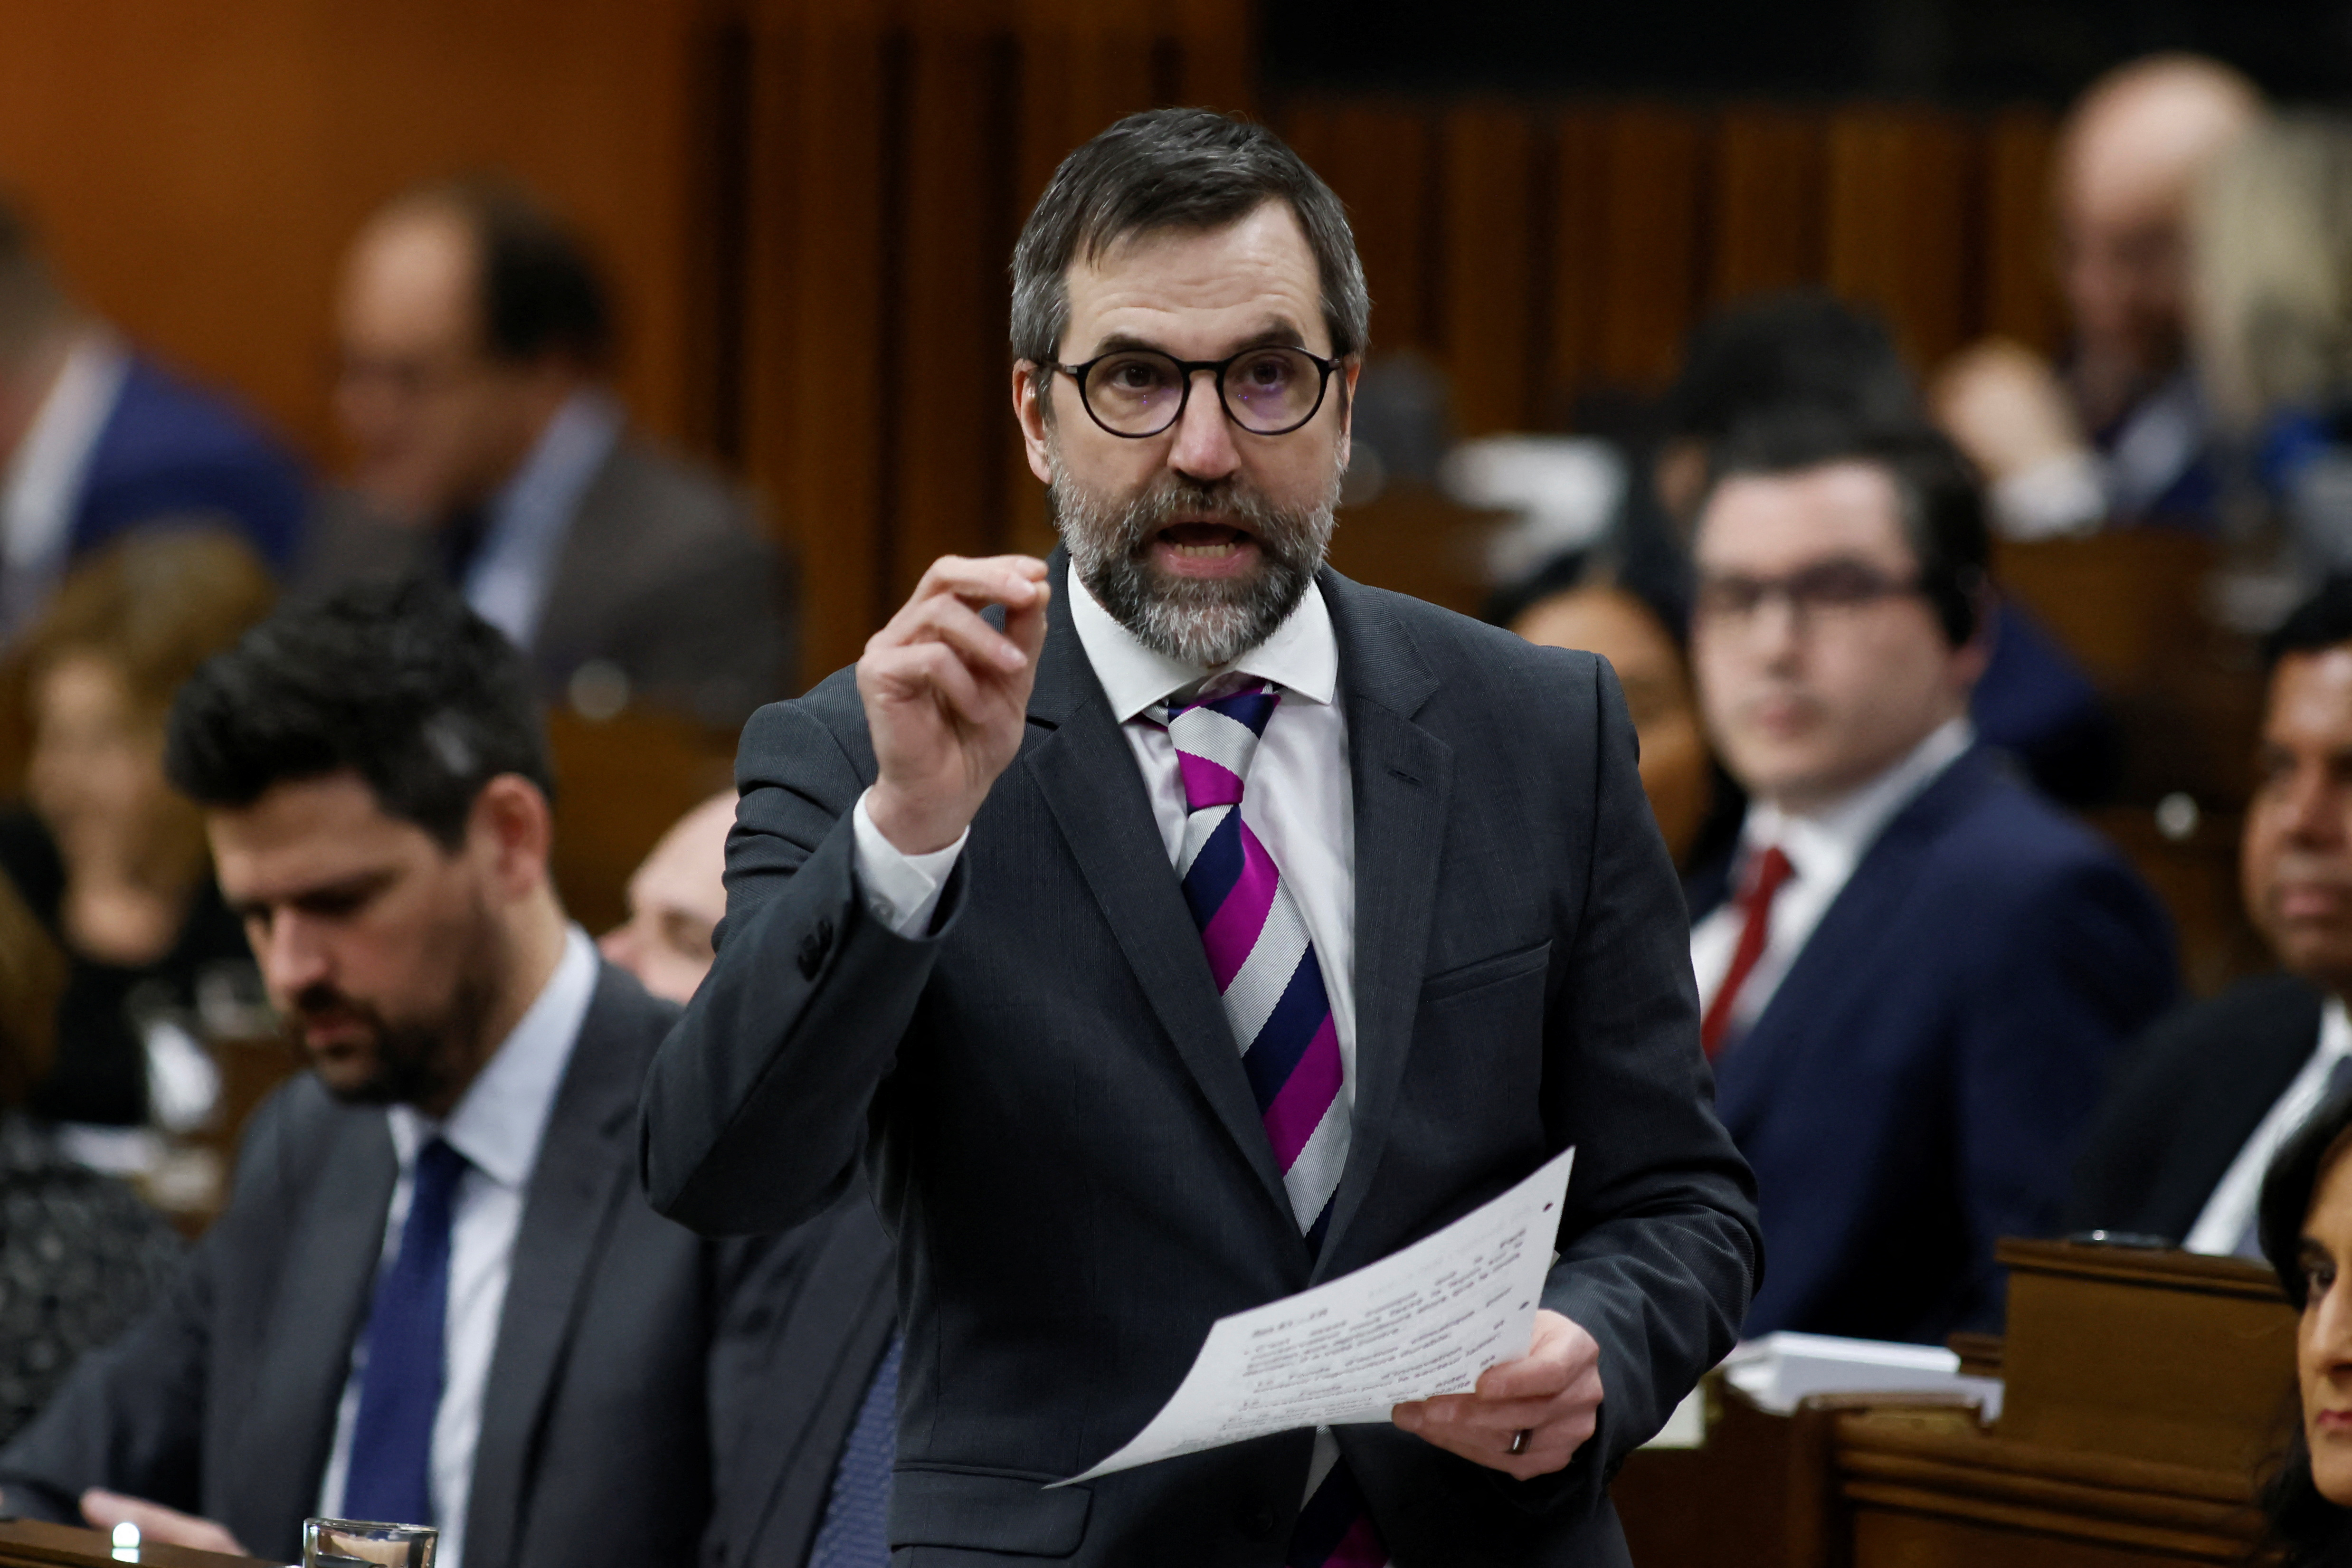 Canada's Minister of the Environment and Climate Change Steven Guilbeault speaks during Question Period in the House of Commons on Parliament Hill in Ottawa